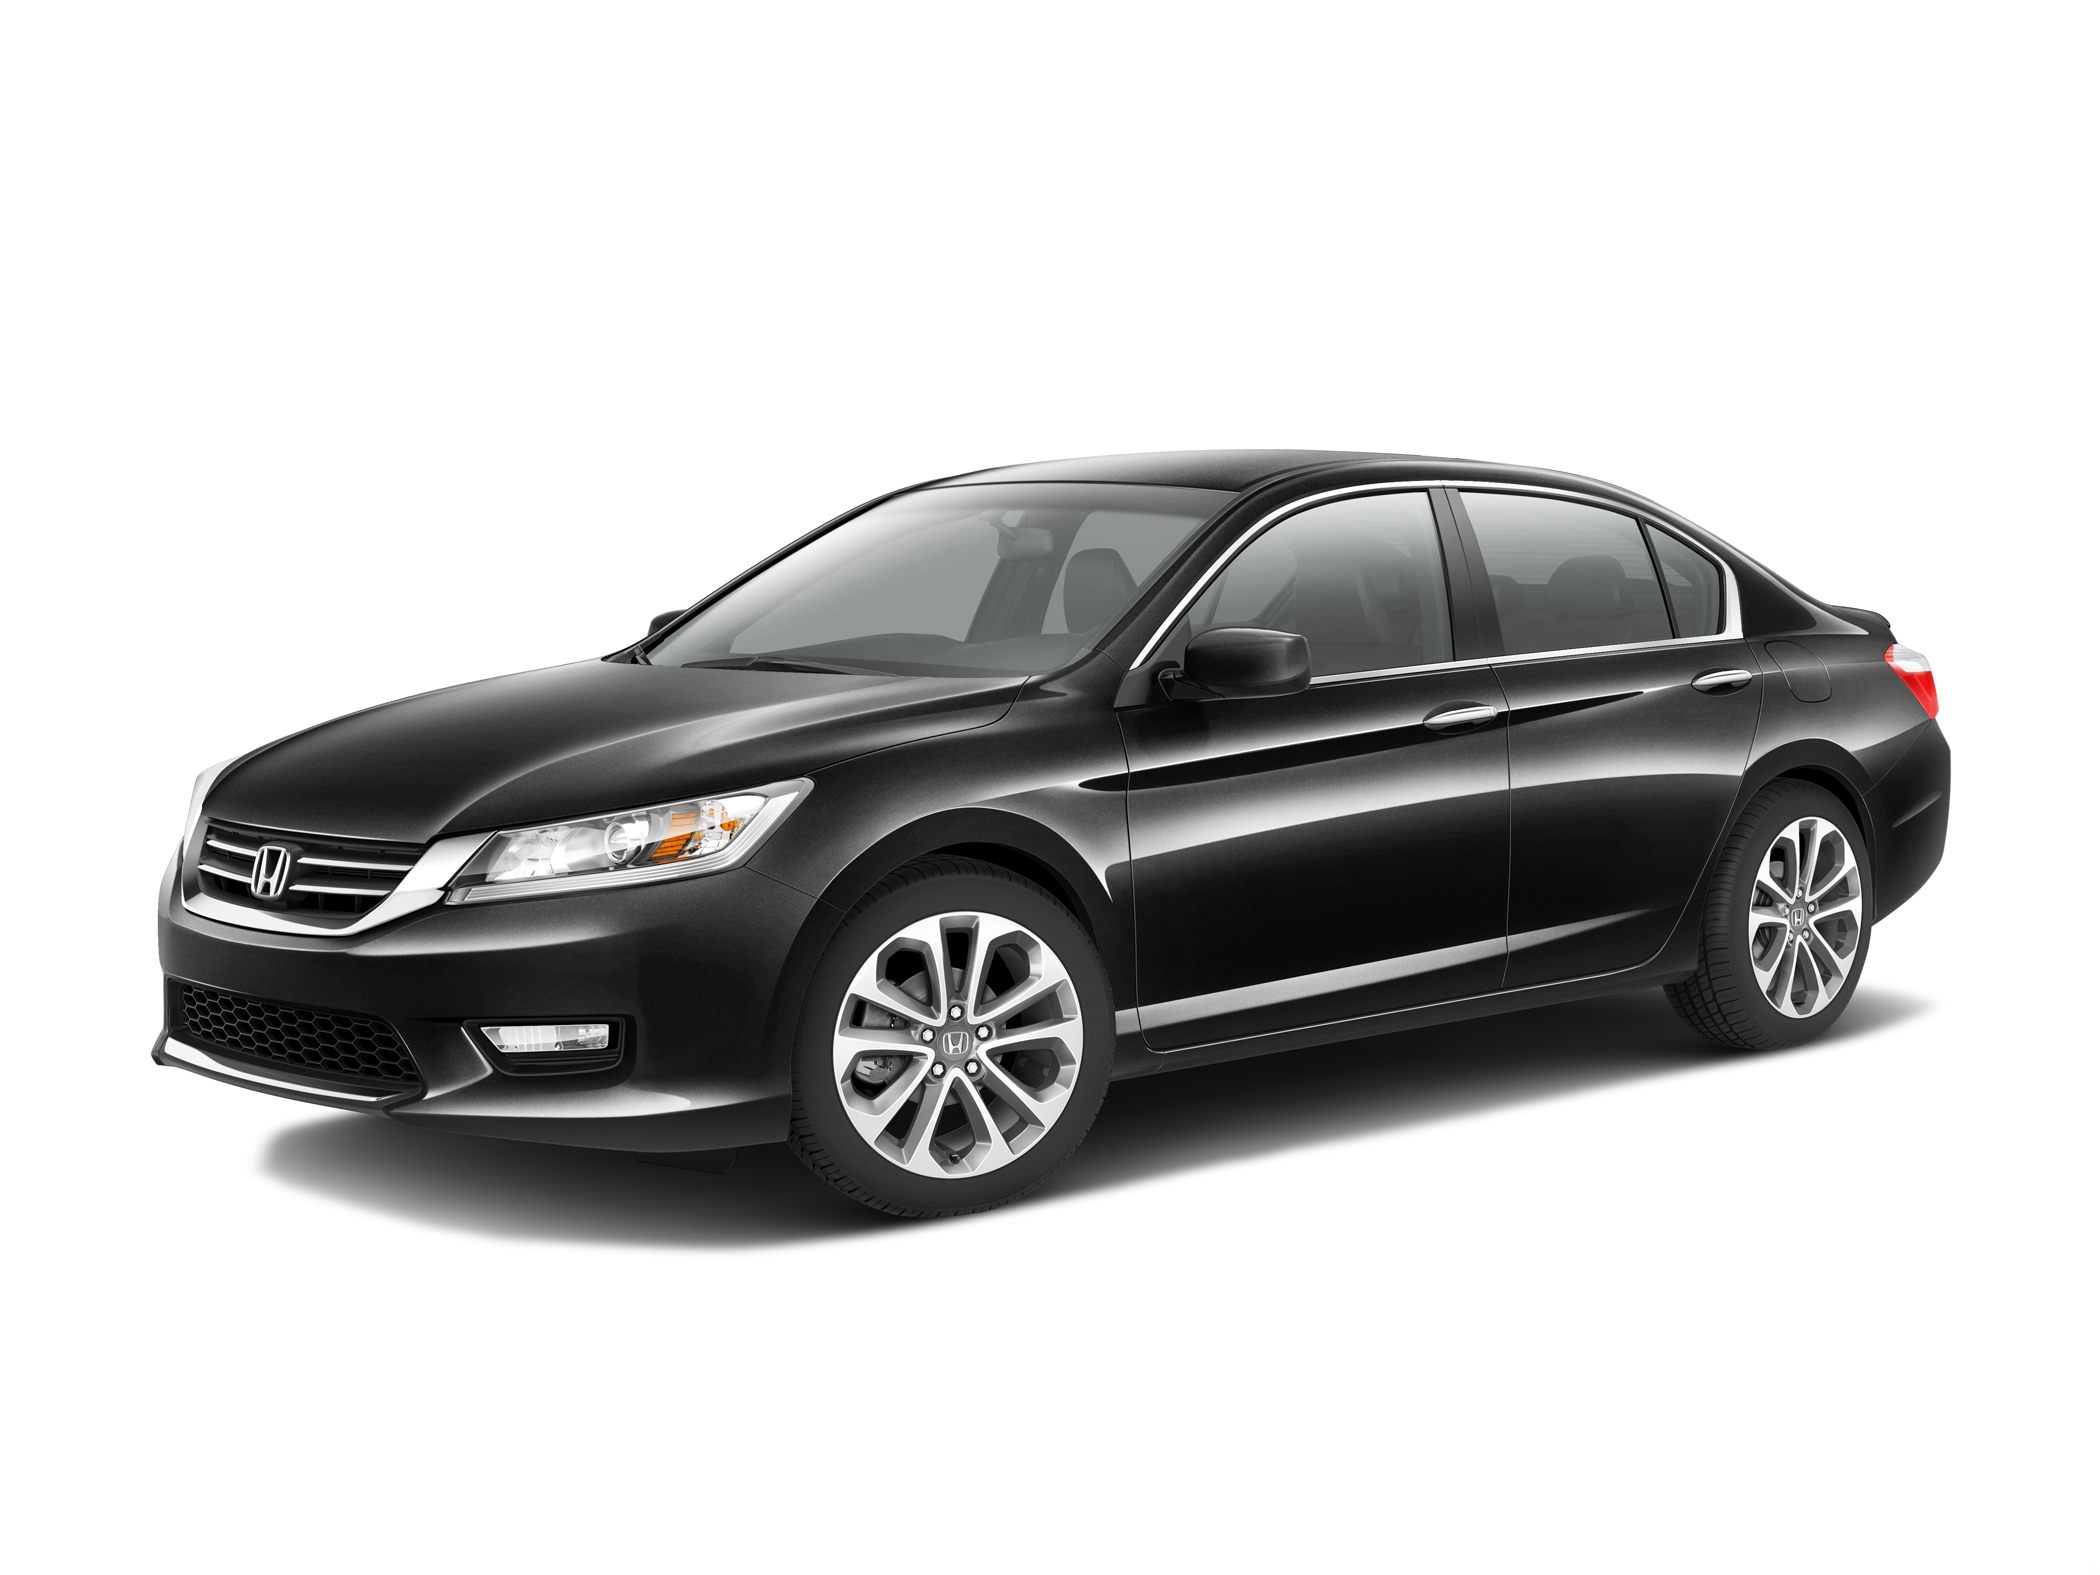 Honda Accord For Rent In Hyderabad